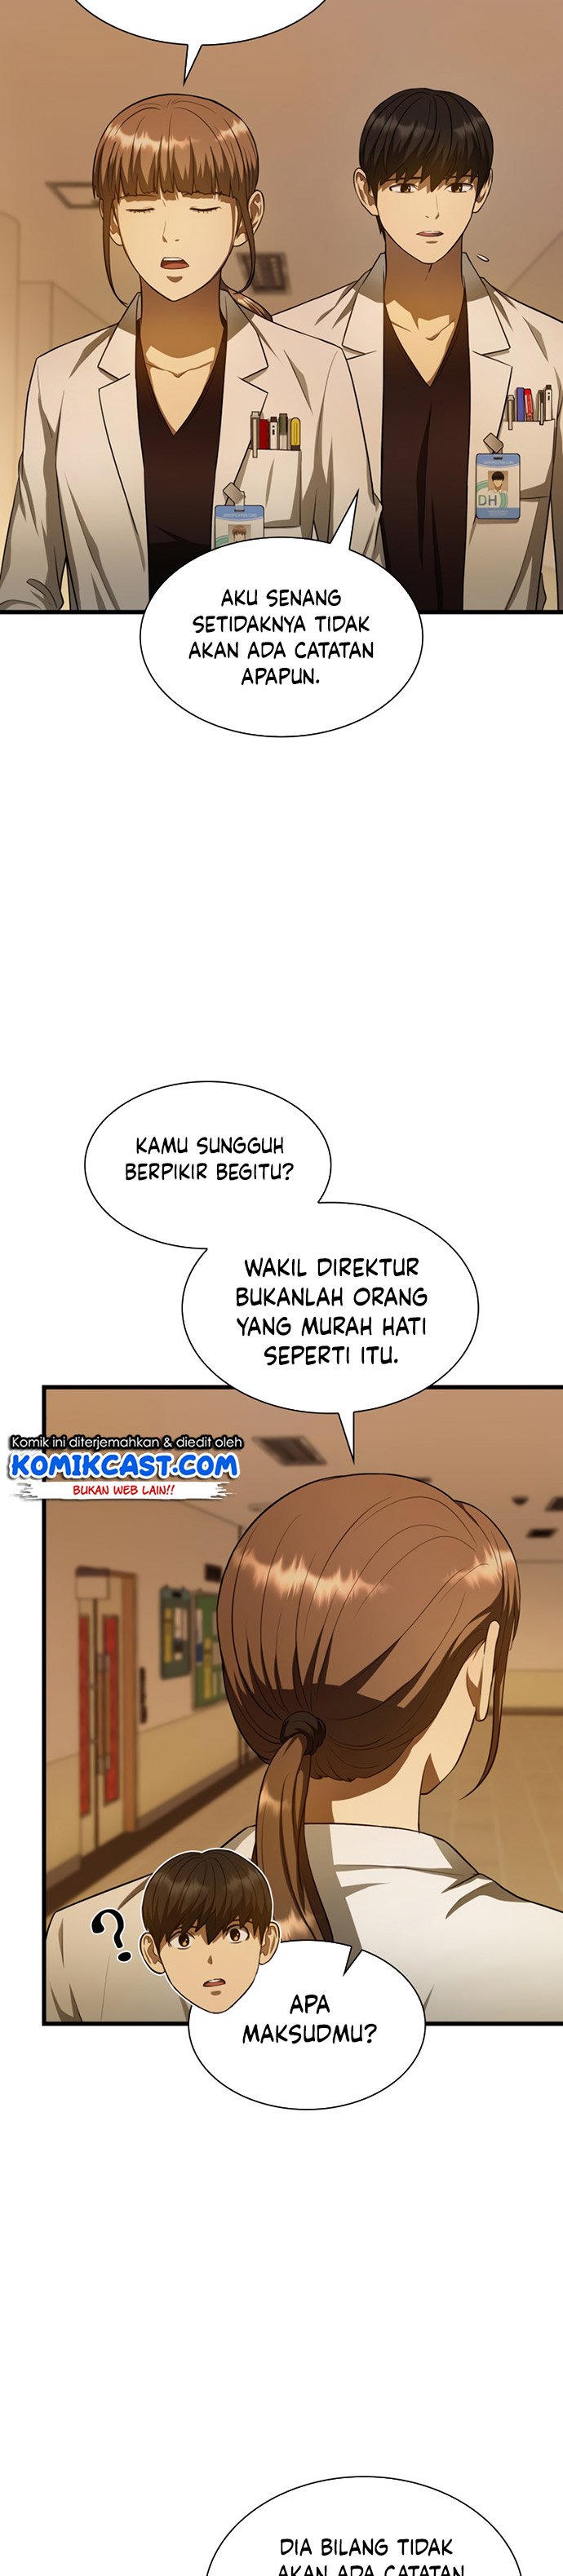 Perfect Surgeon Chapter 26 27